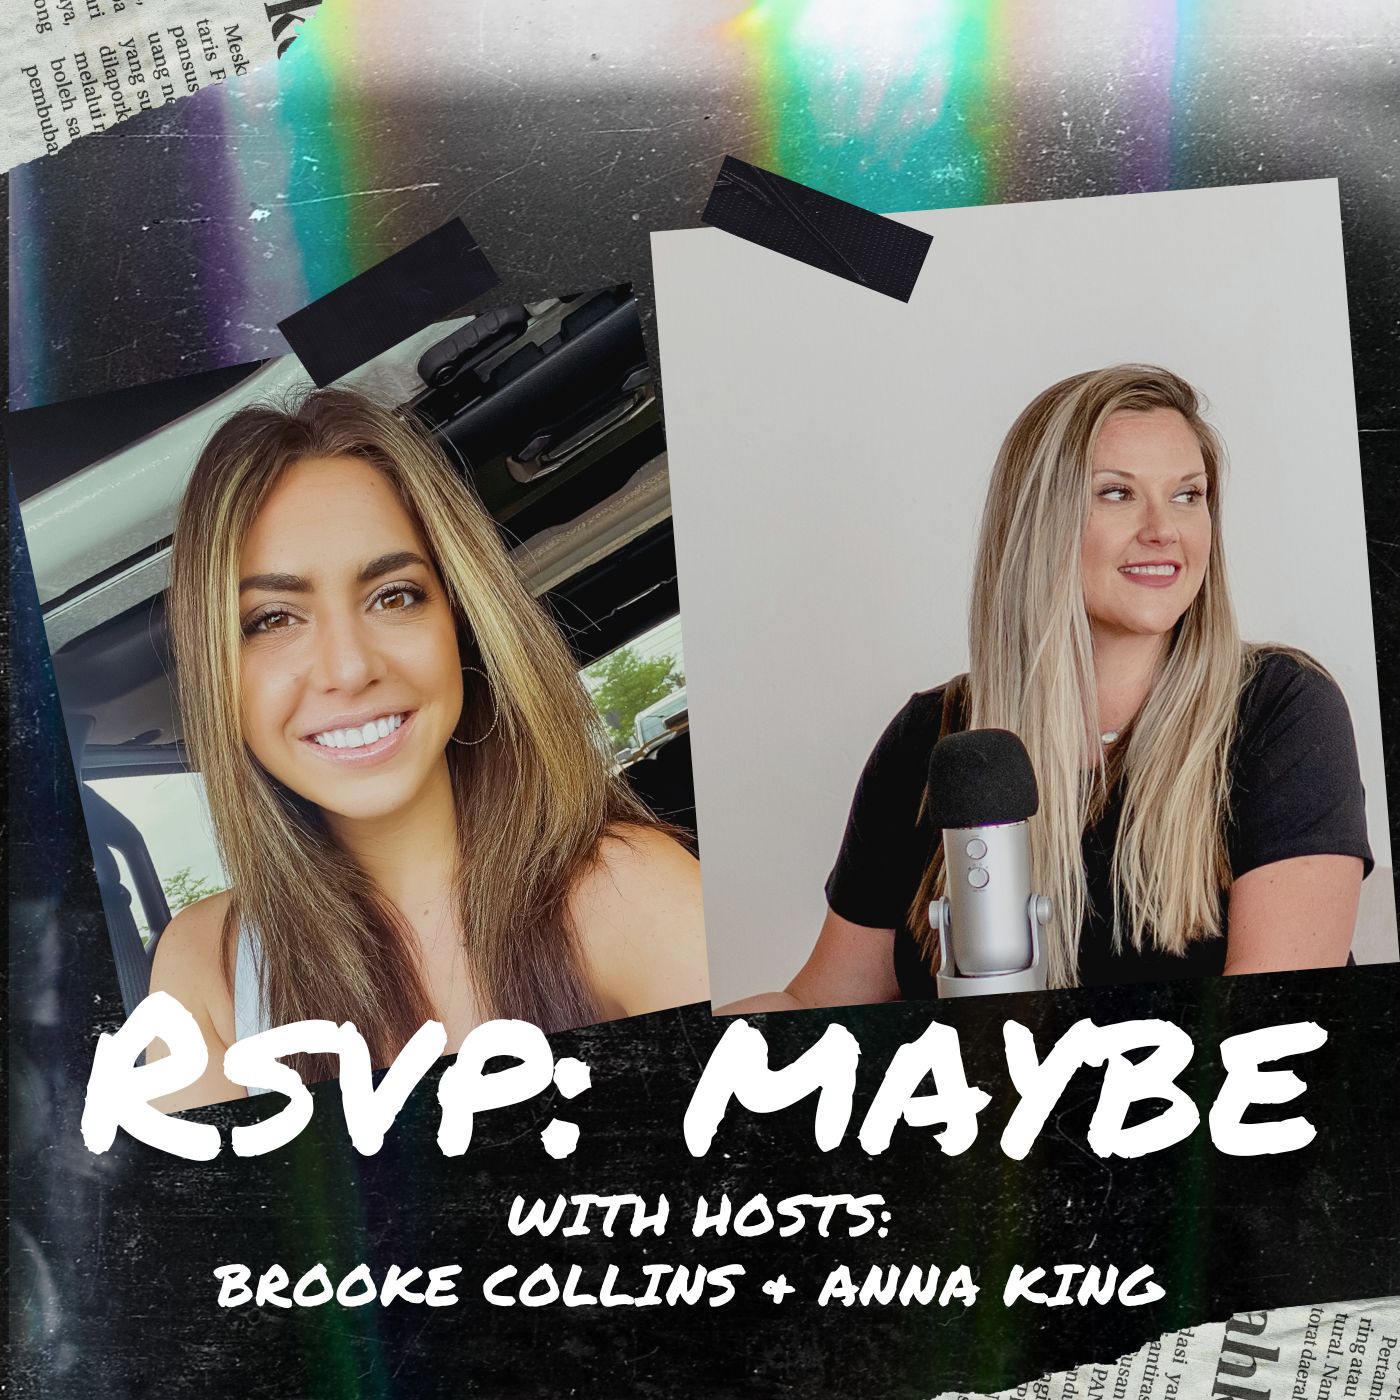 Welcome to the RSVP: Maybe Podcast